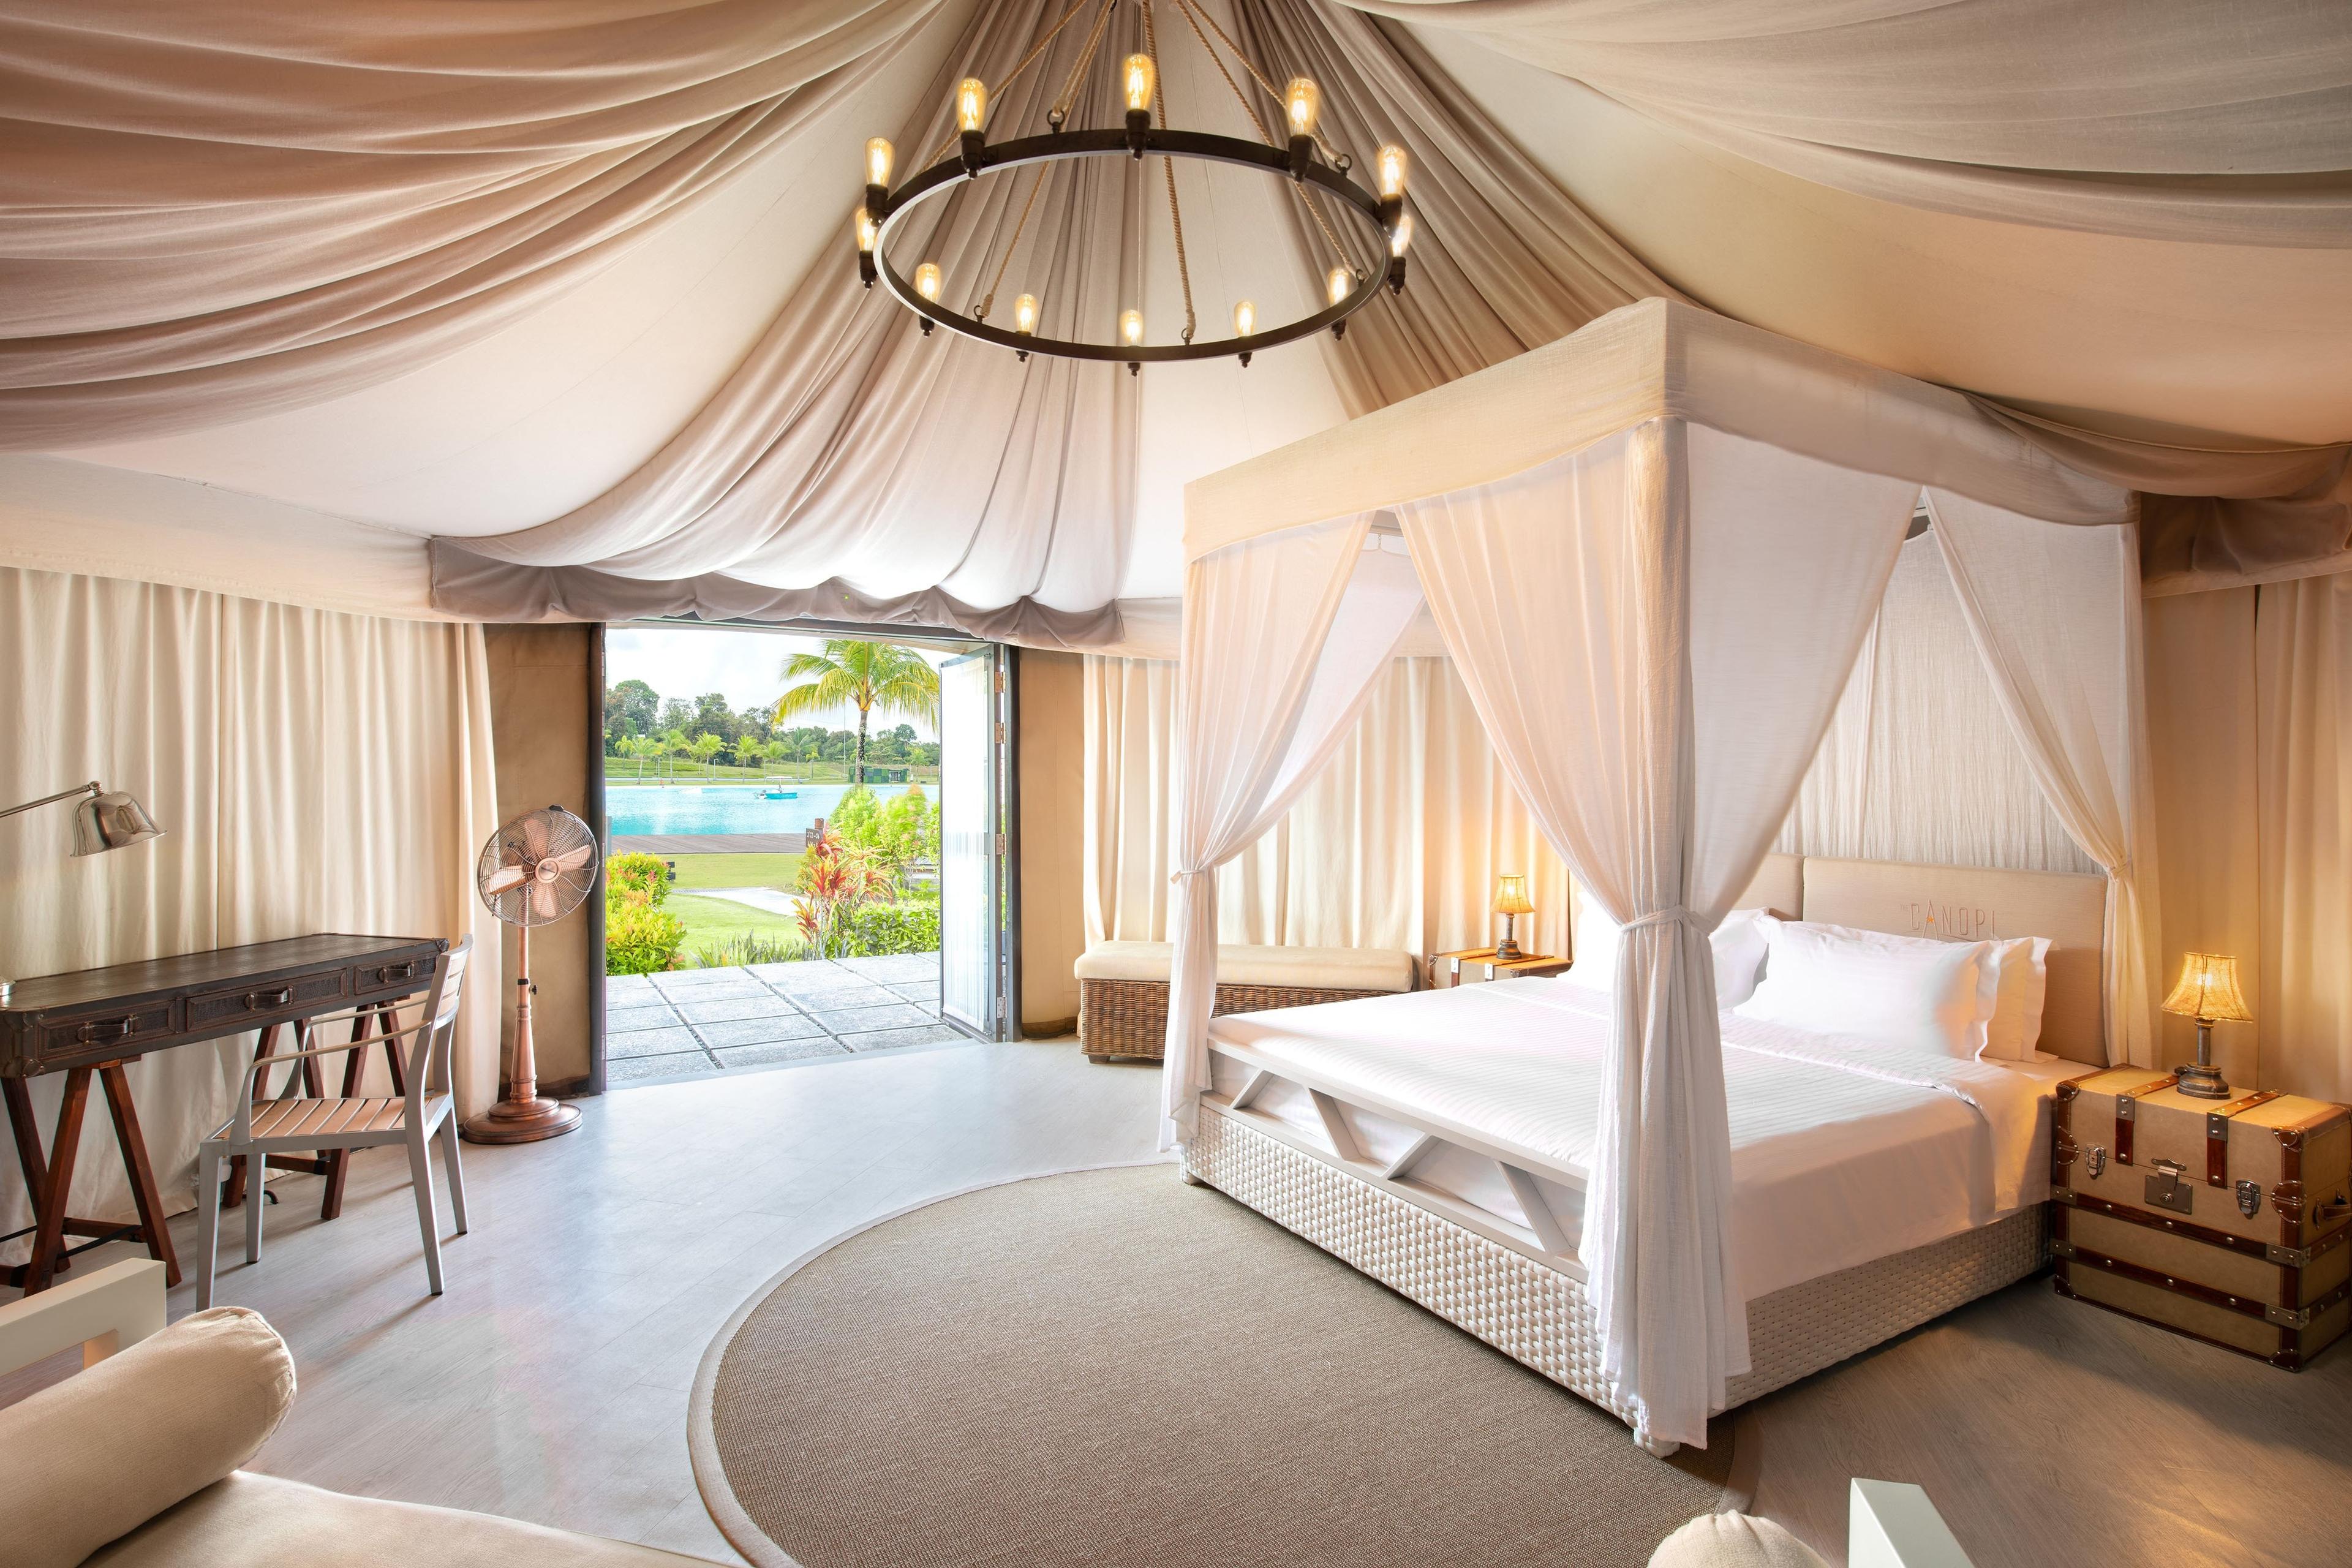 Situated near the water, our 40-square-meter Lagoon View Tents offer stunning panoramas of the crystal blue water.